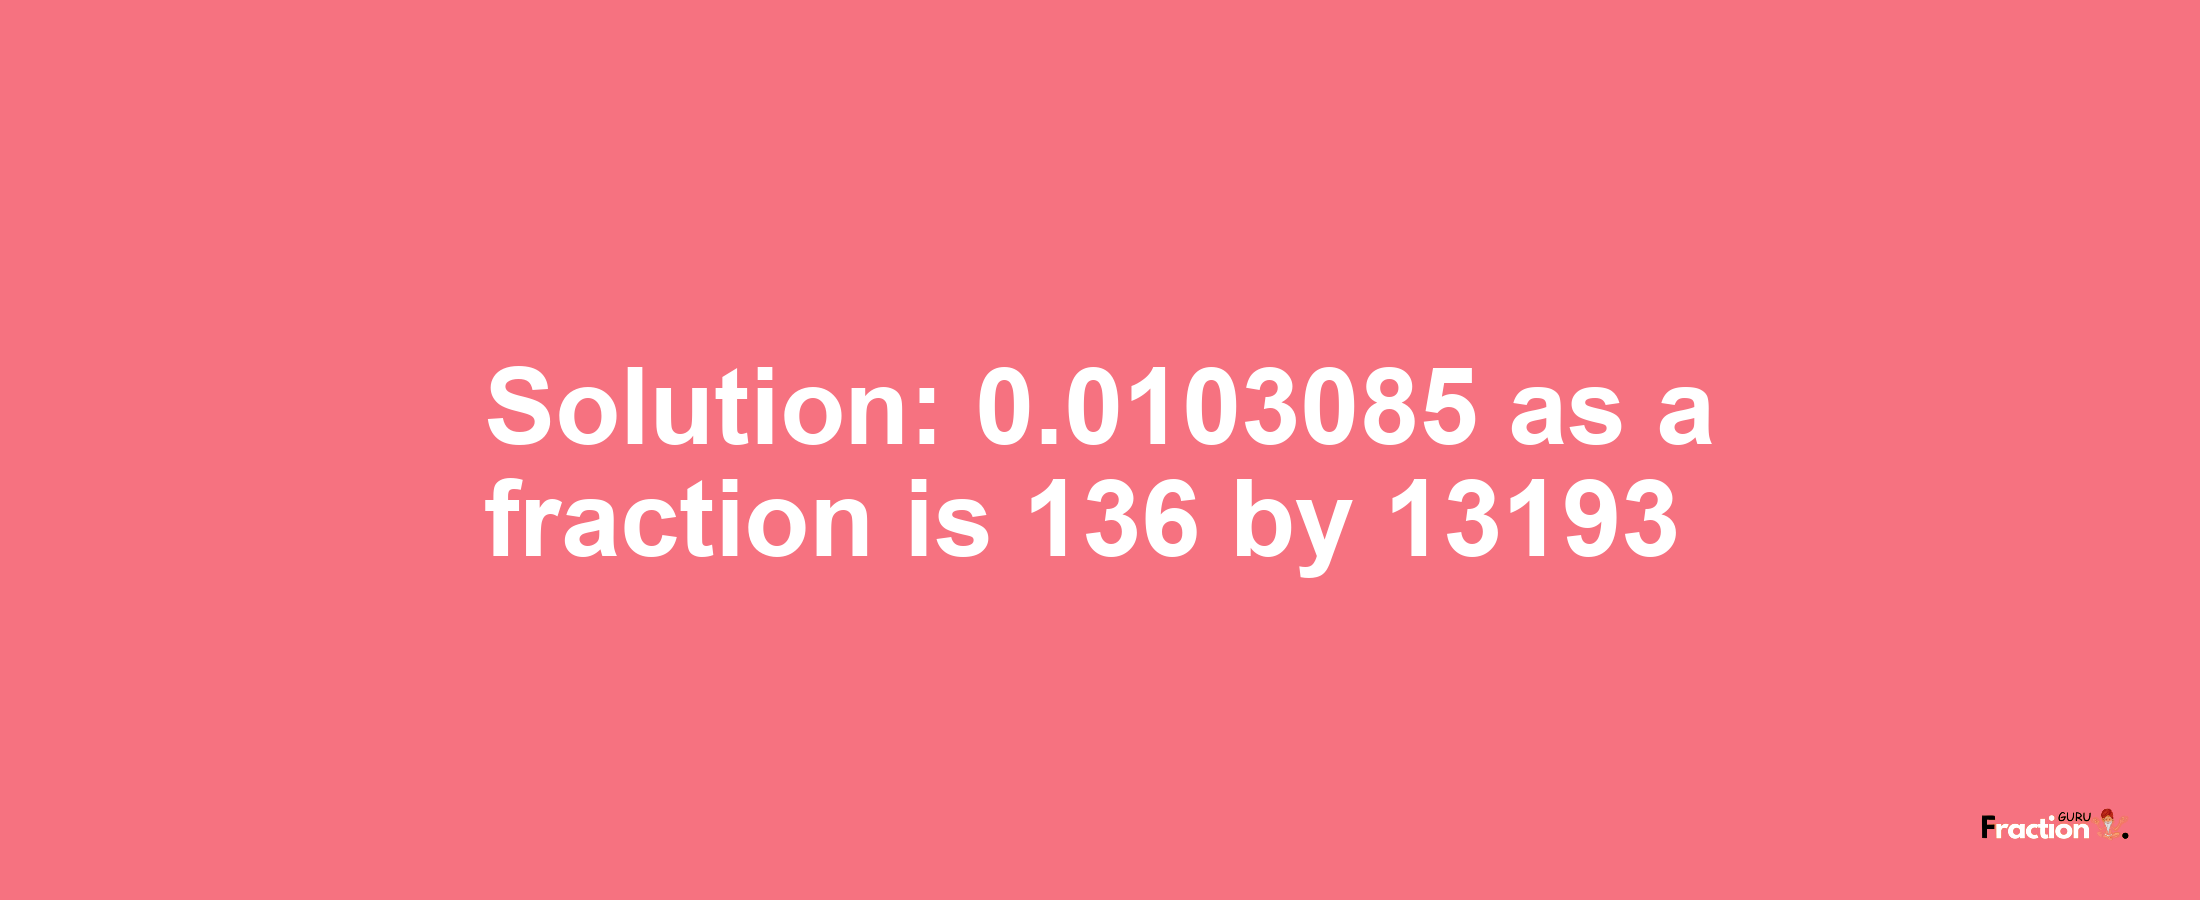 Solution:0.0103085 as a fraction is 136/13193